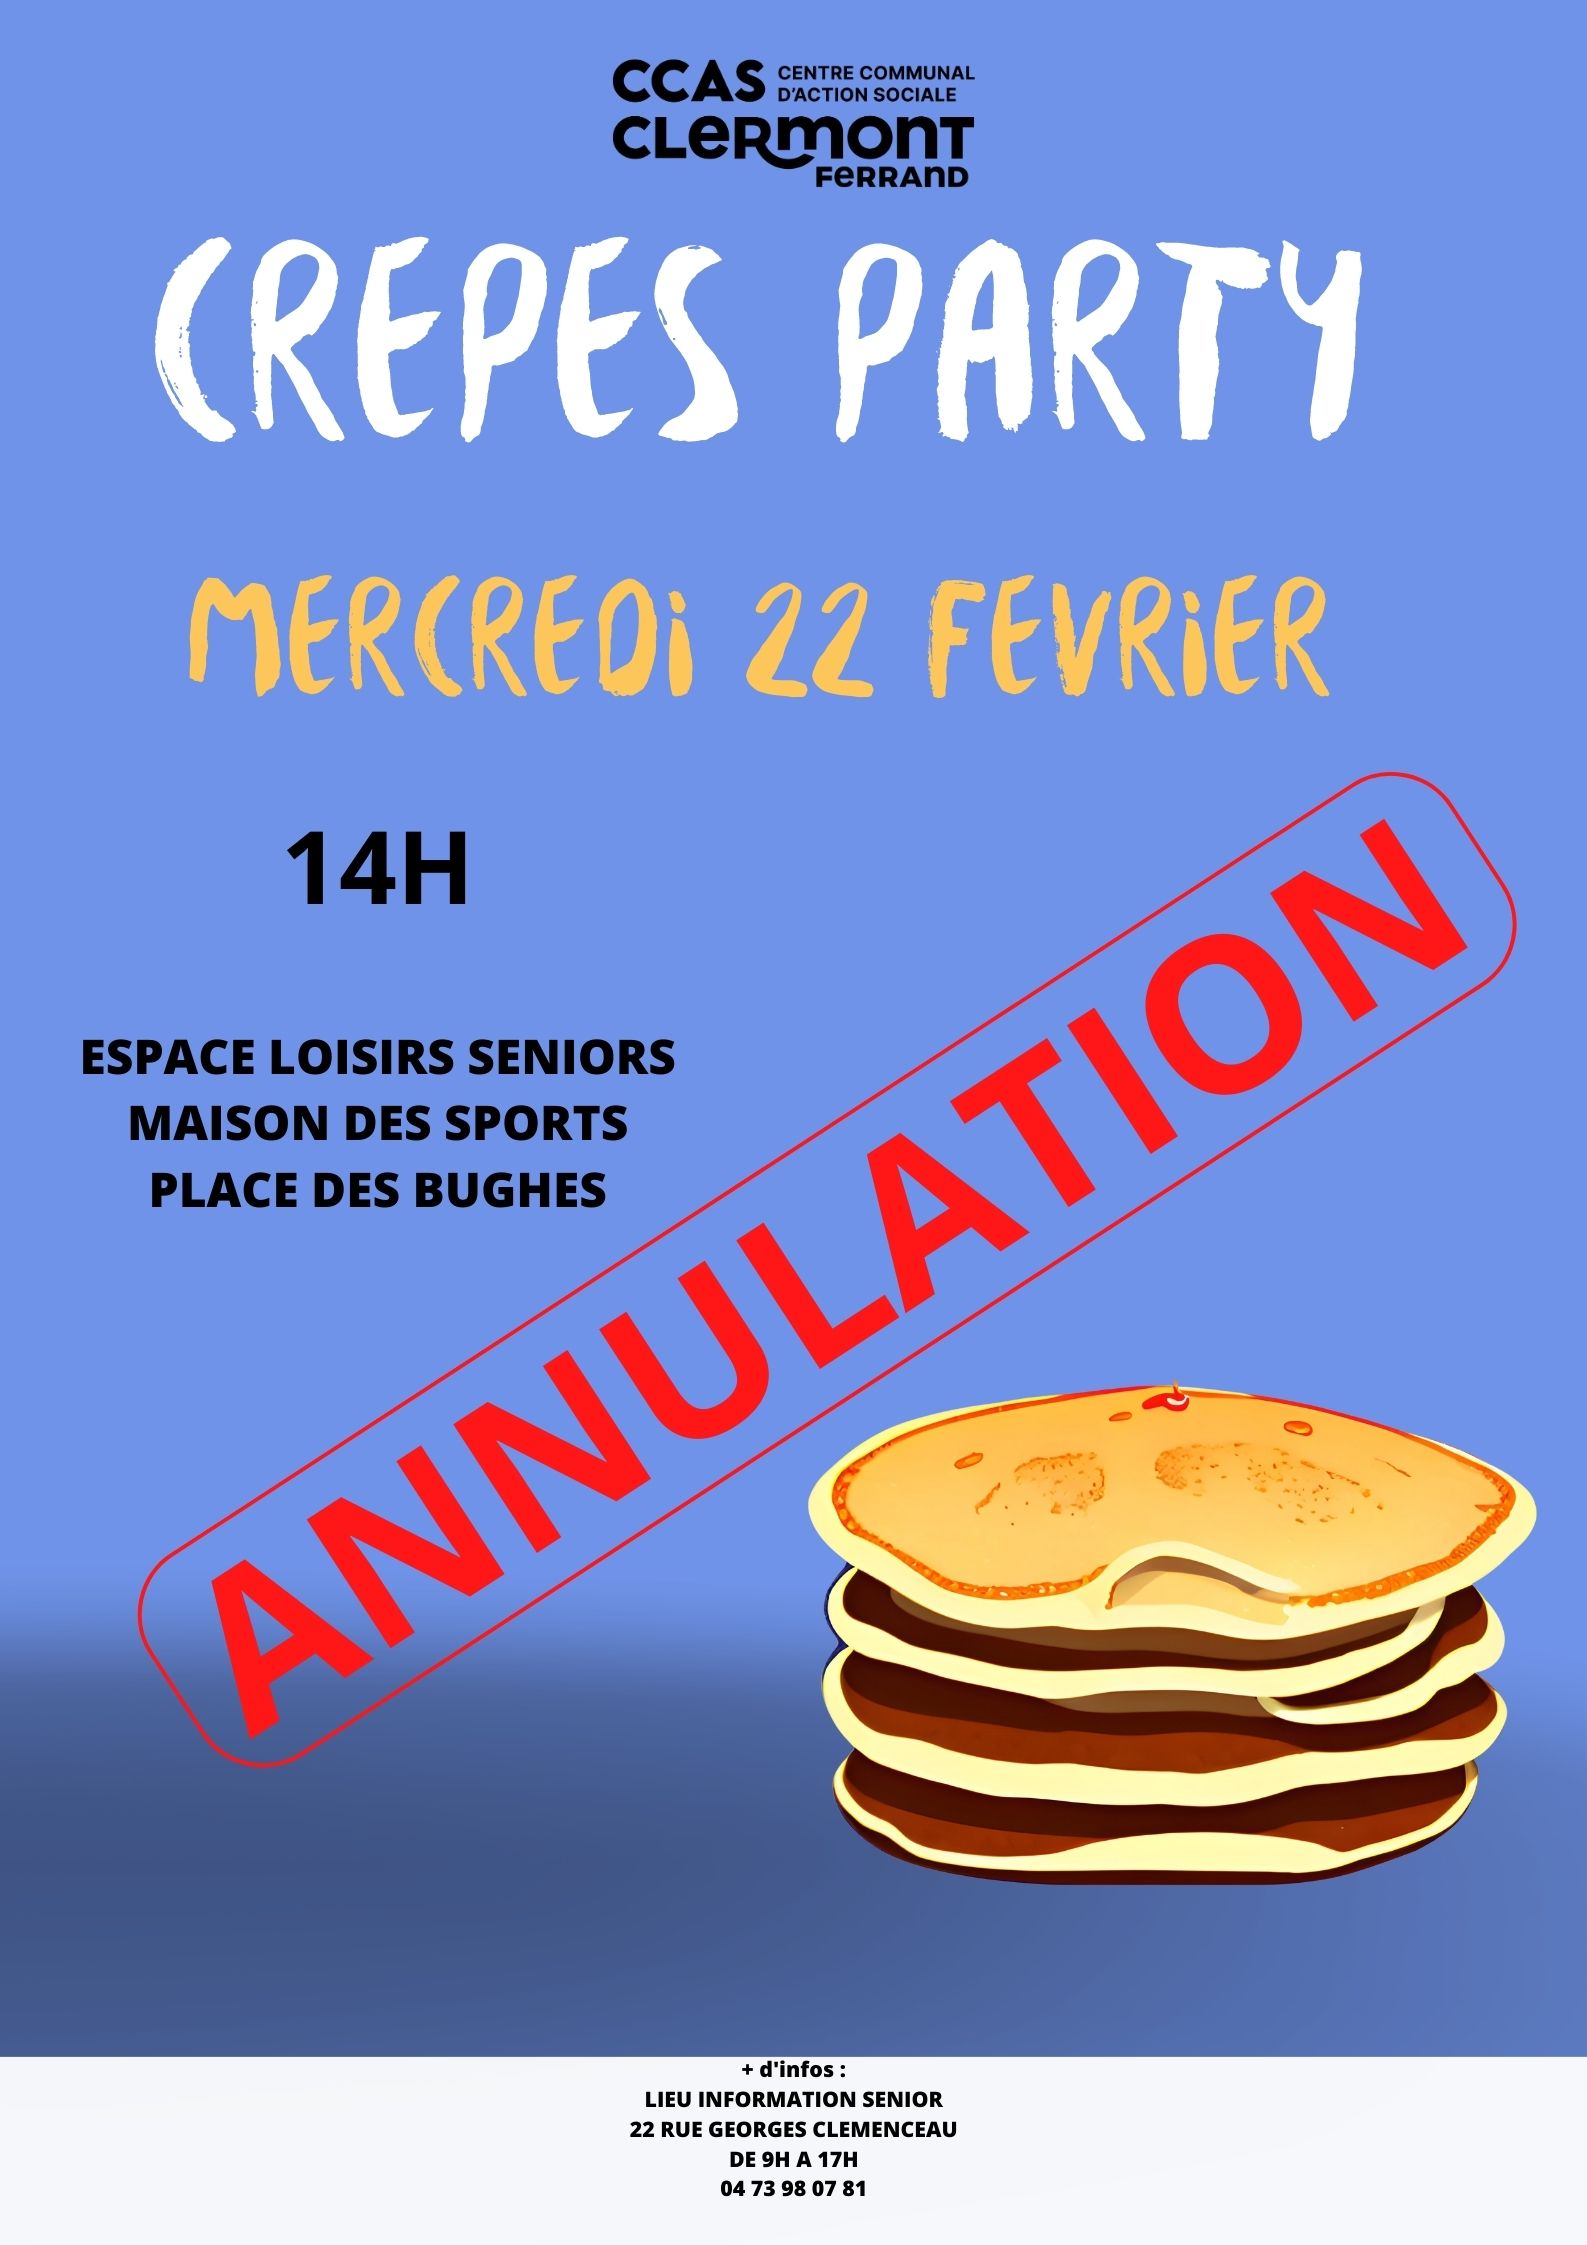 CREPES PARTY ANNULATION